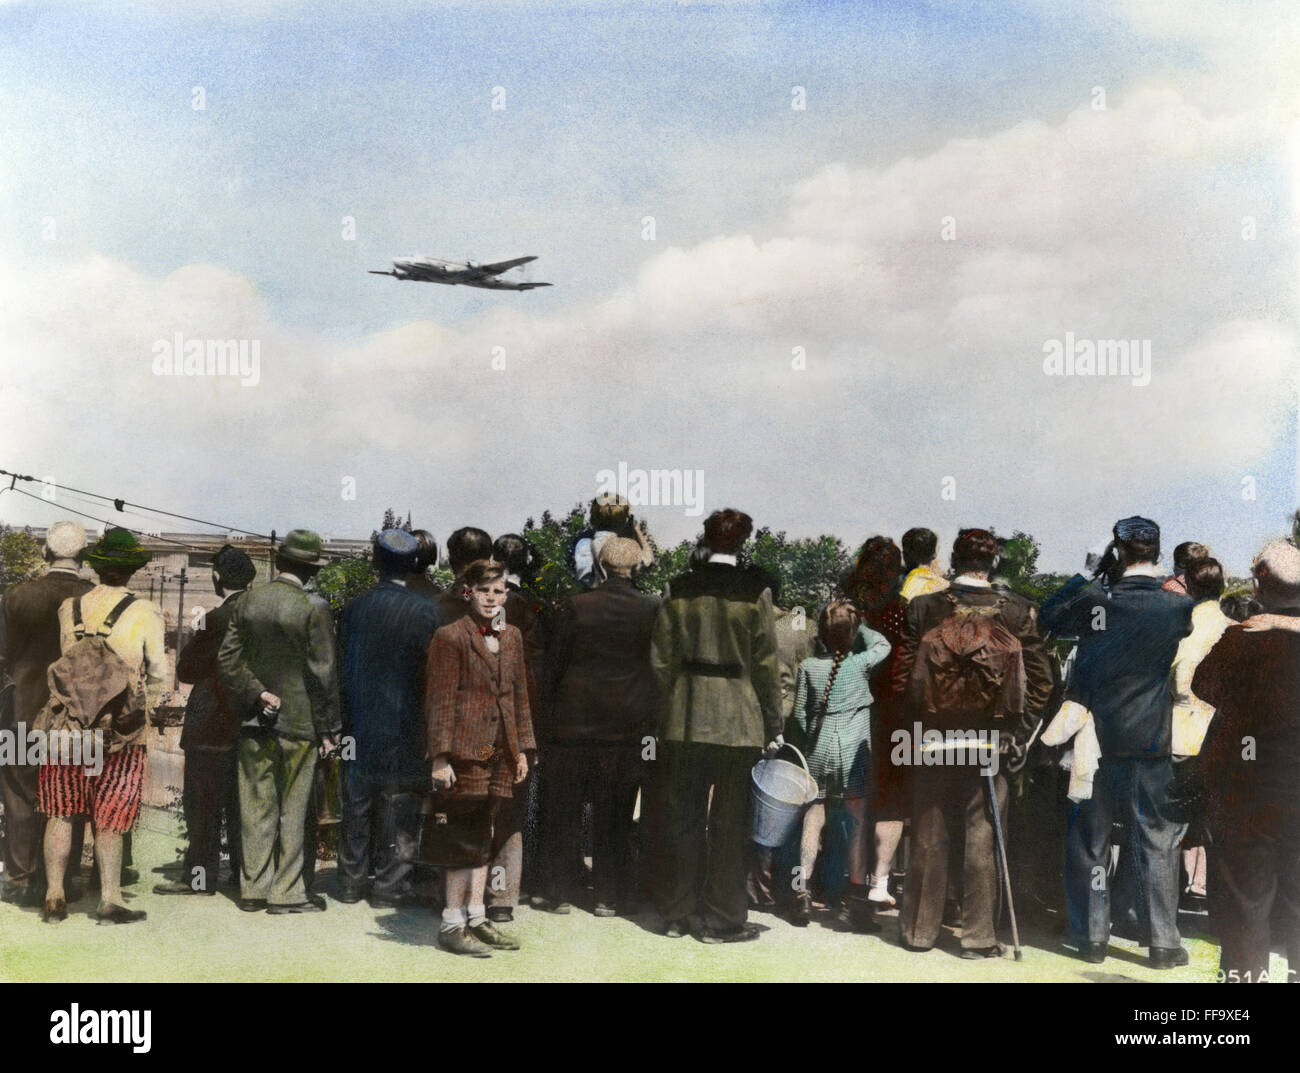 BERLIN AIRLIFT, 1948. /nBerliners watching the arrival and departure of Allied airlift freighters at Templehof Air Base 3 months after the beginning of the Soviet blockade of Berlin on 1 April 1948. Oil over a photograph. Stock Photo